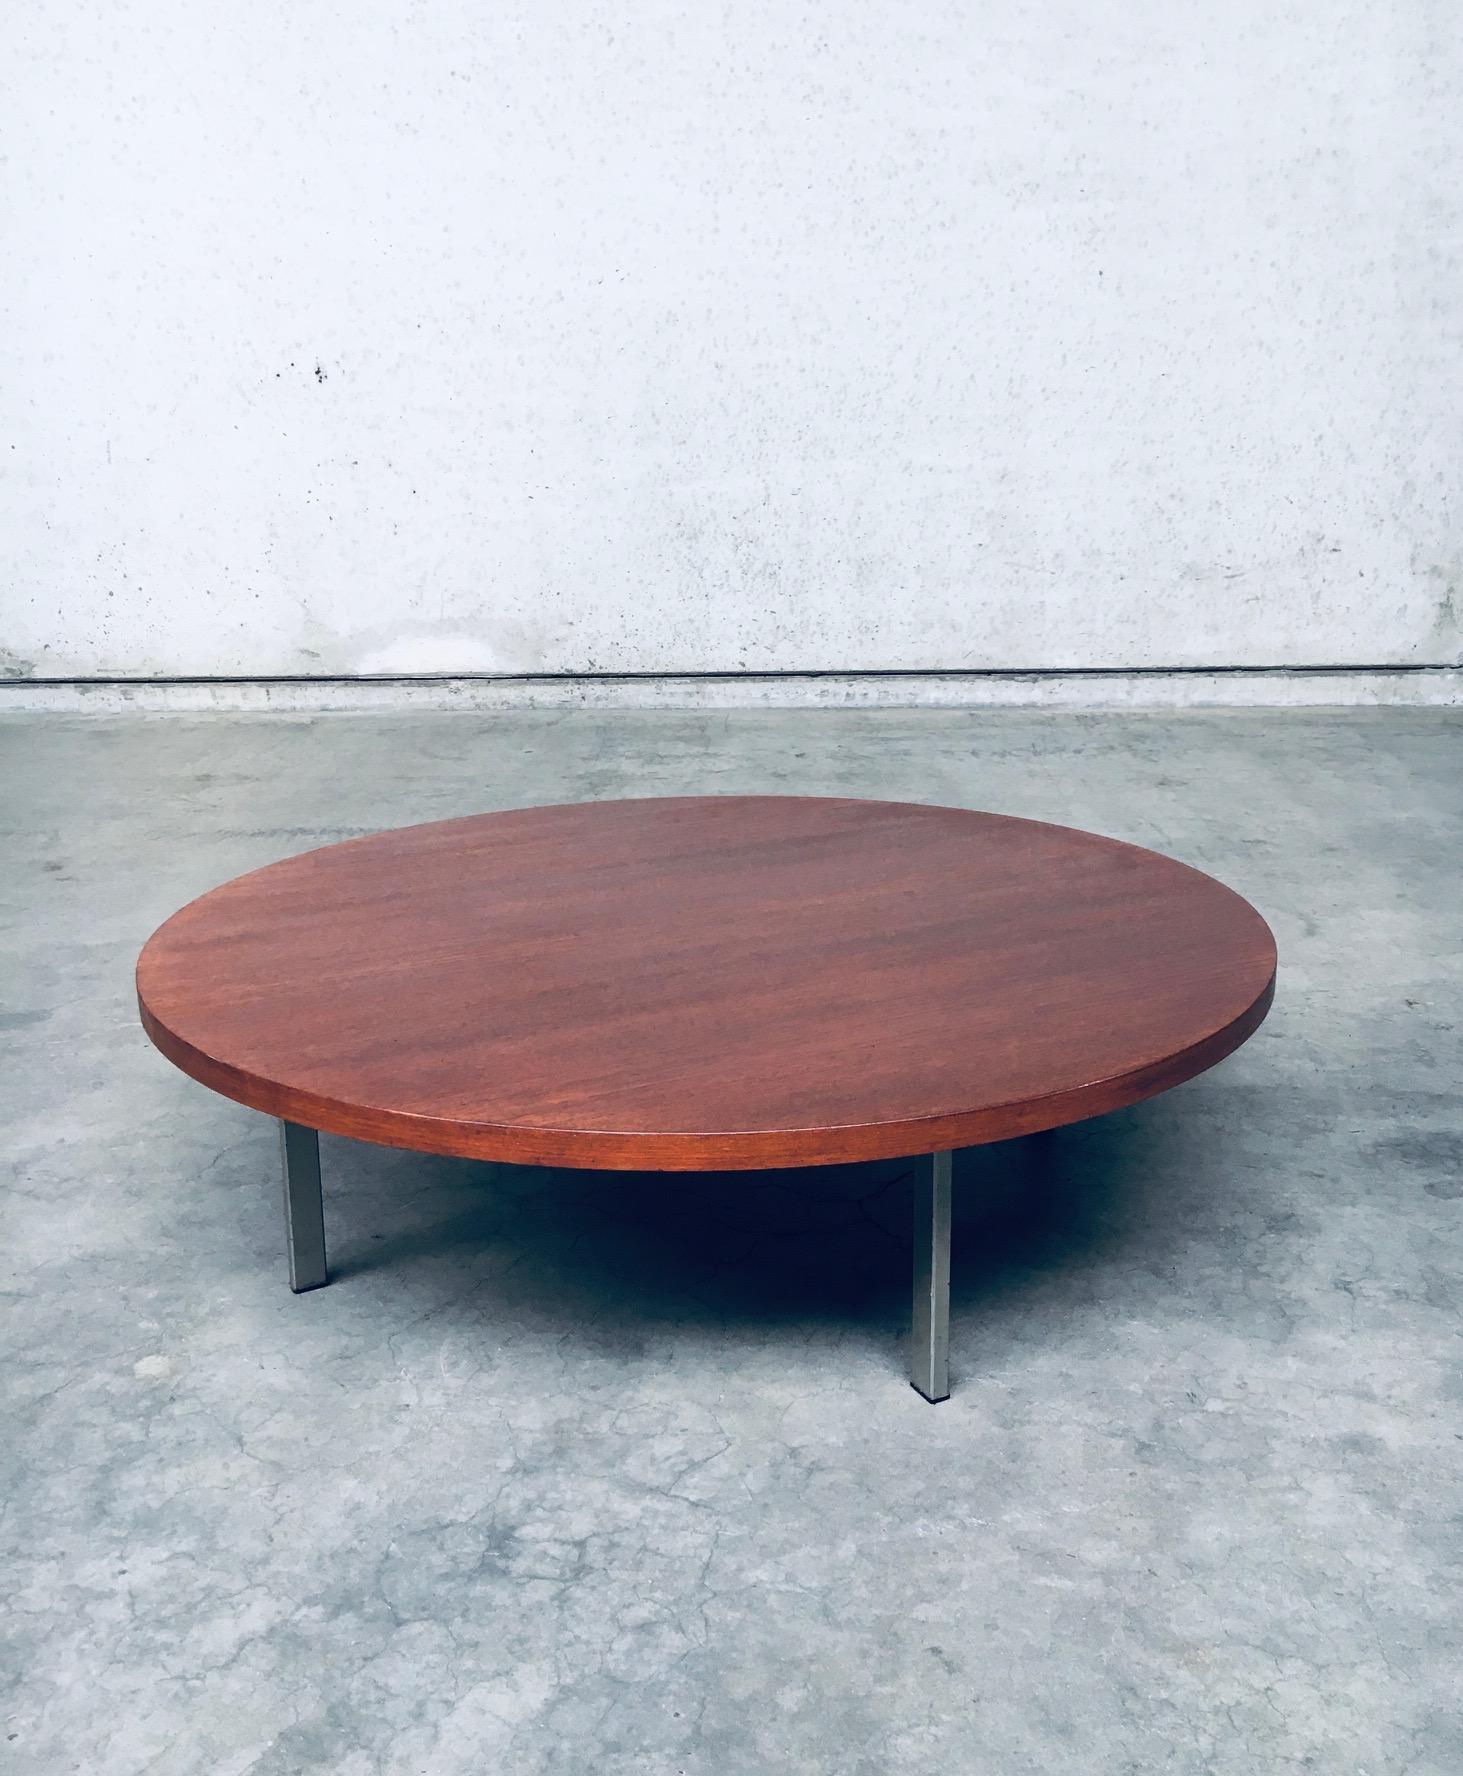 Vintage Midcentury Modern Dutch Design XL Round Coffee Table by Pastoe. Made in the Netherlands, 1960's period. XL round veneer covered top with 4 square metal feet. Has it's original Pastoe label on the underside. The top has been refinished. Comes